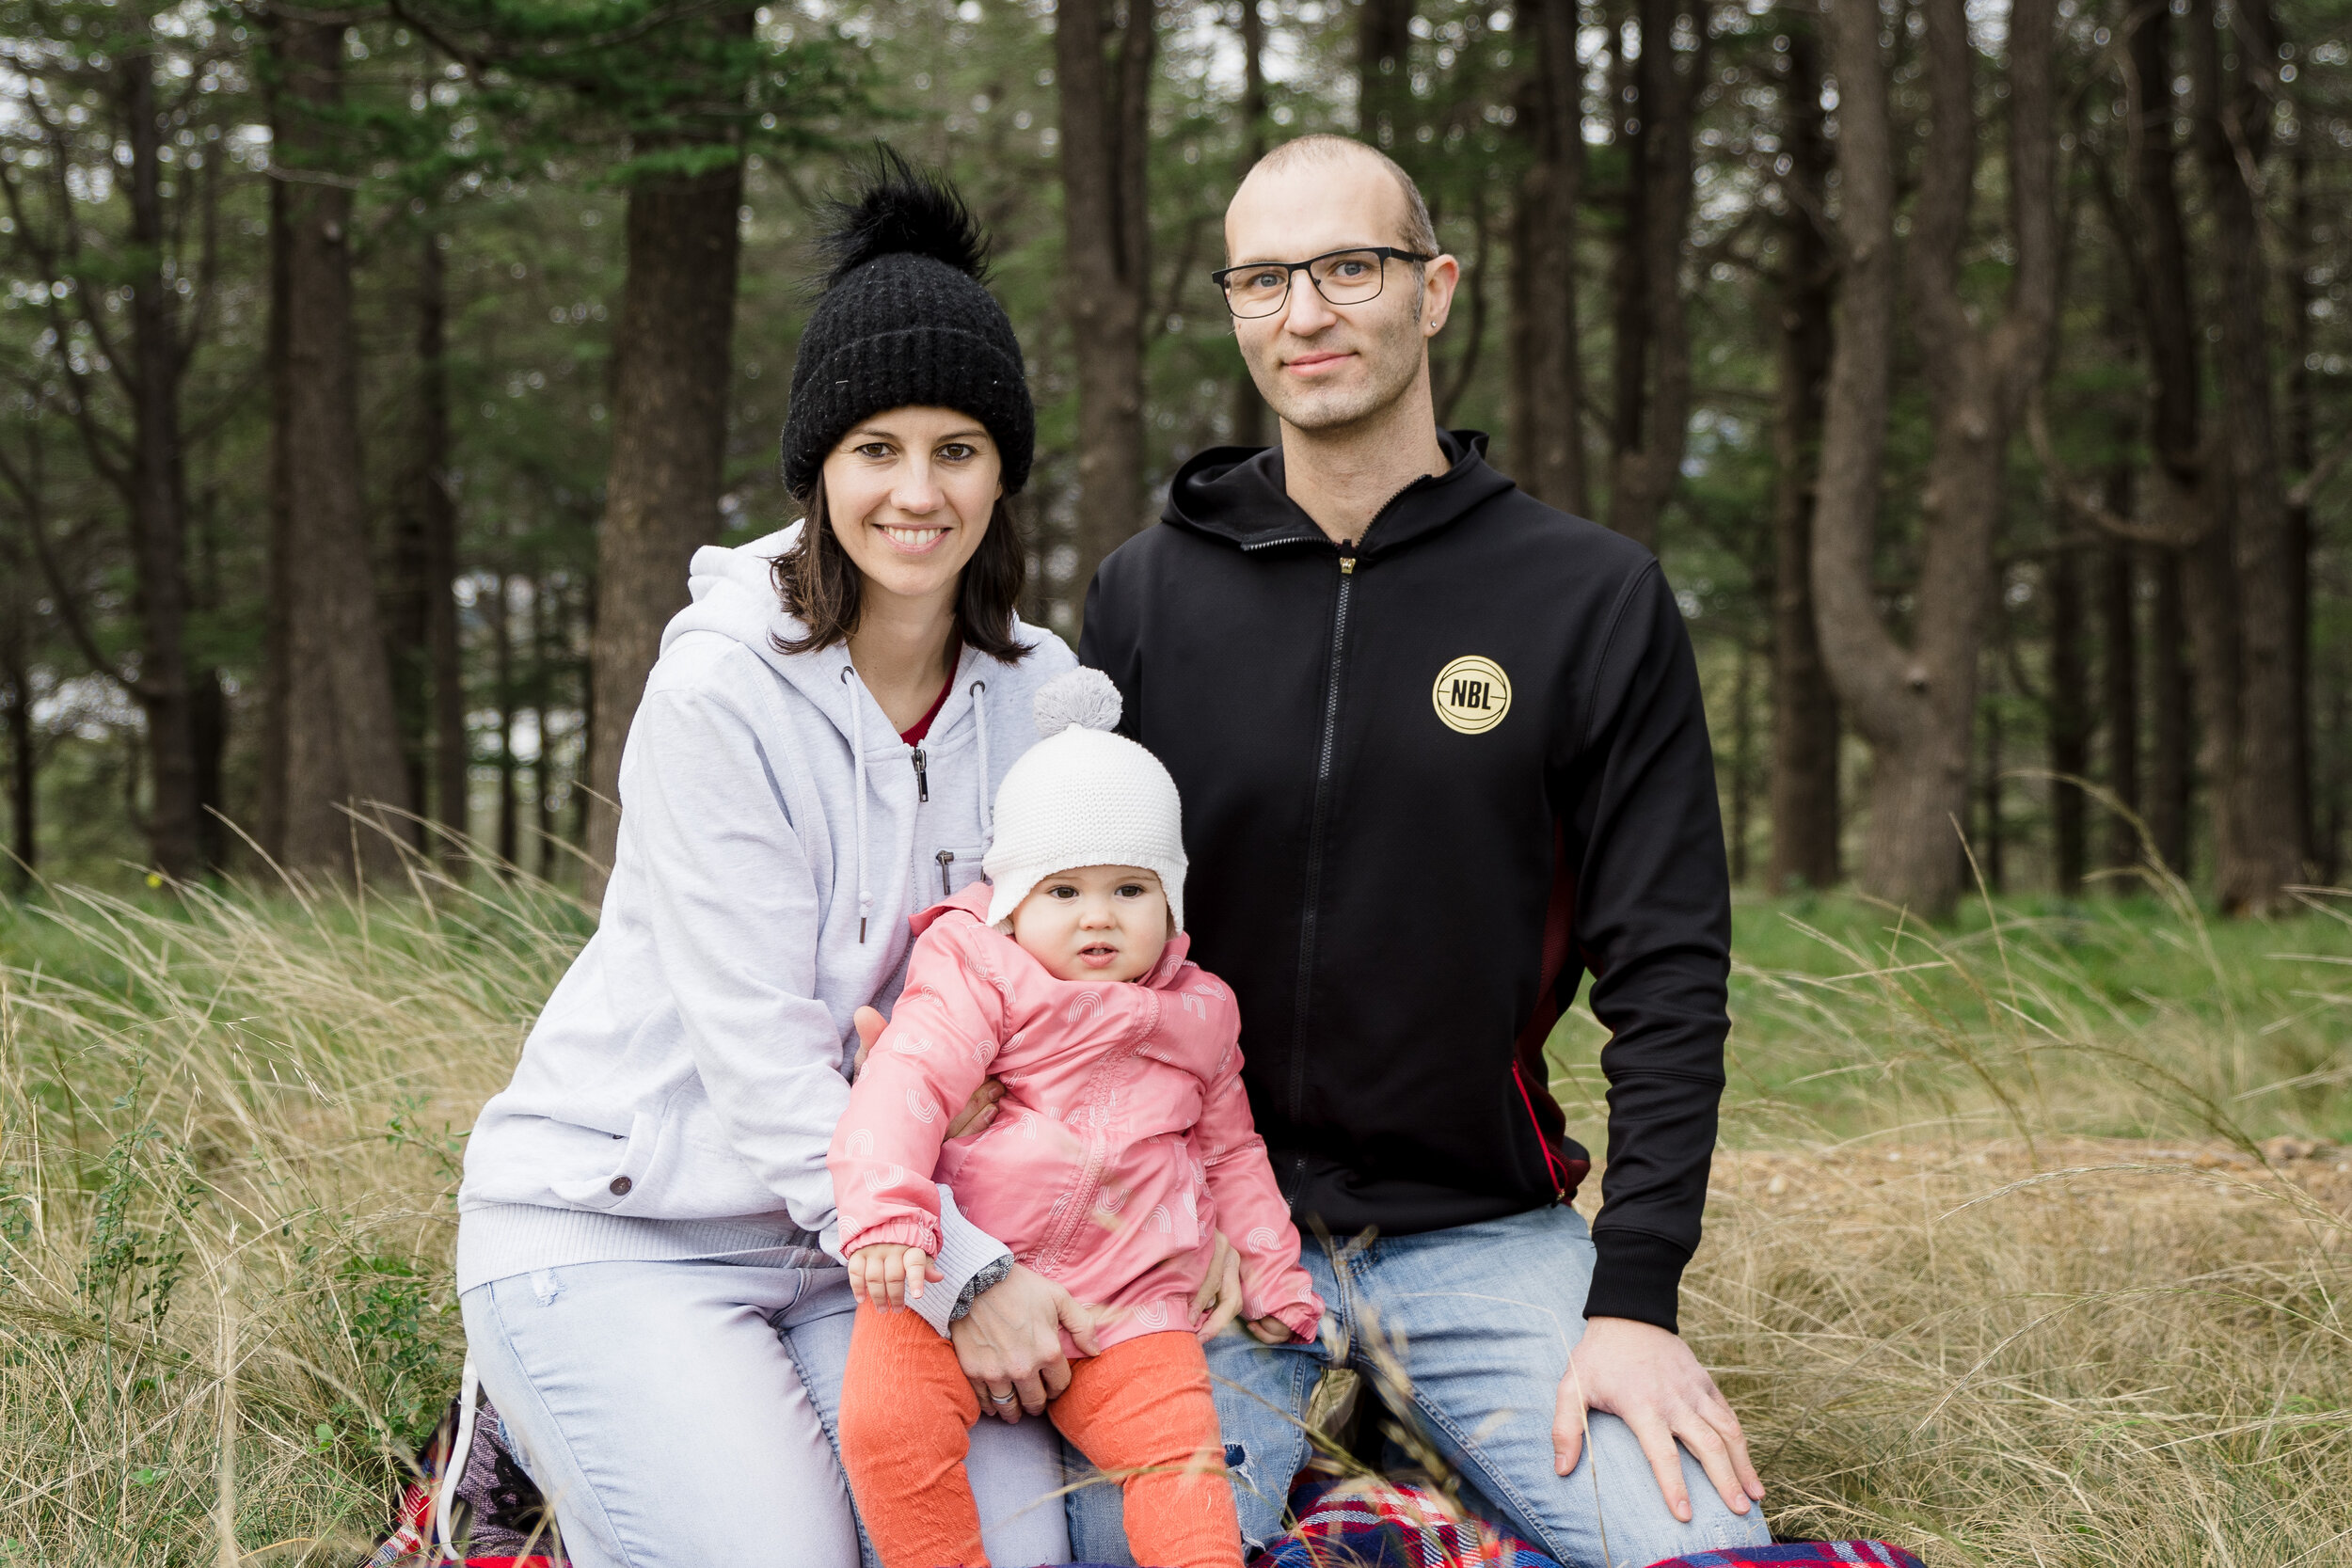 Canberra Family photography: AJ Nitz Images - Family pose together